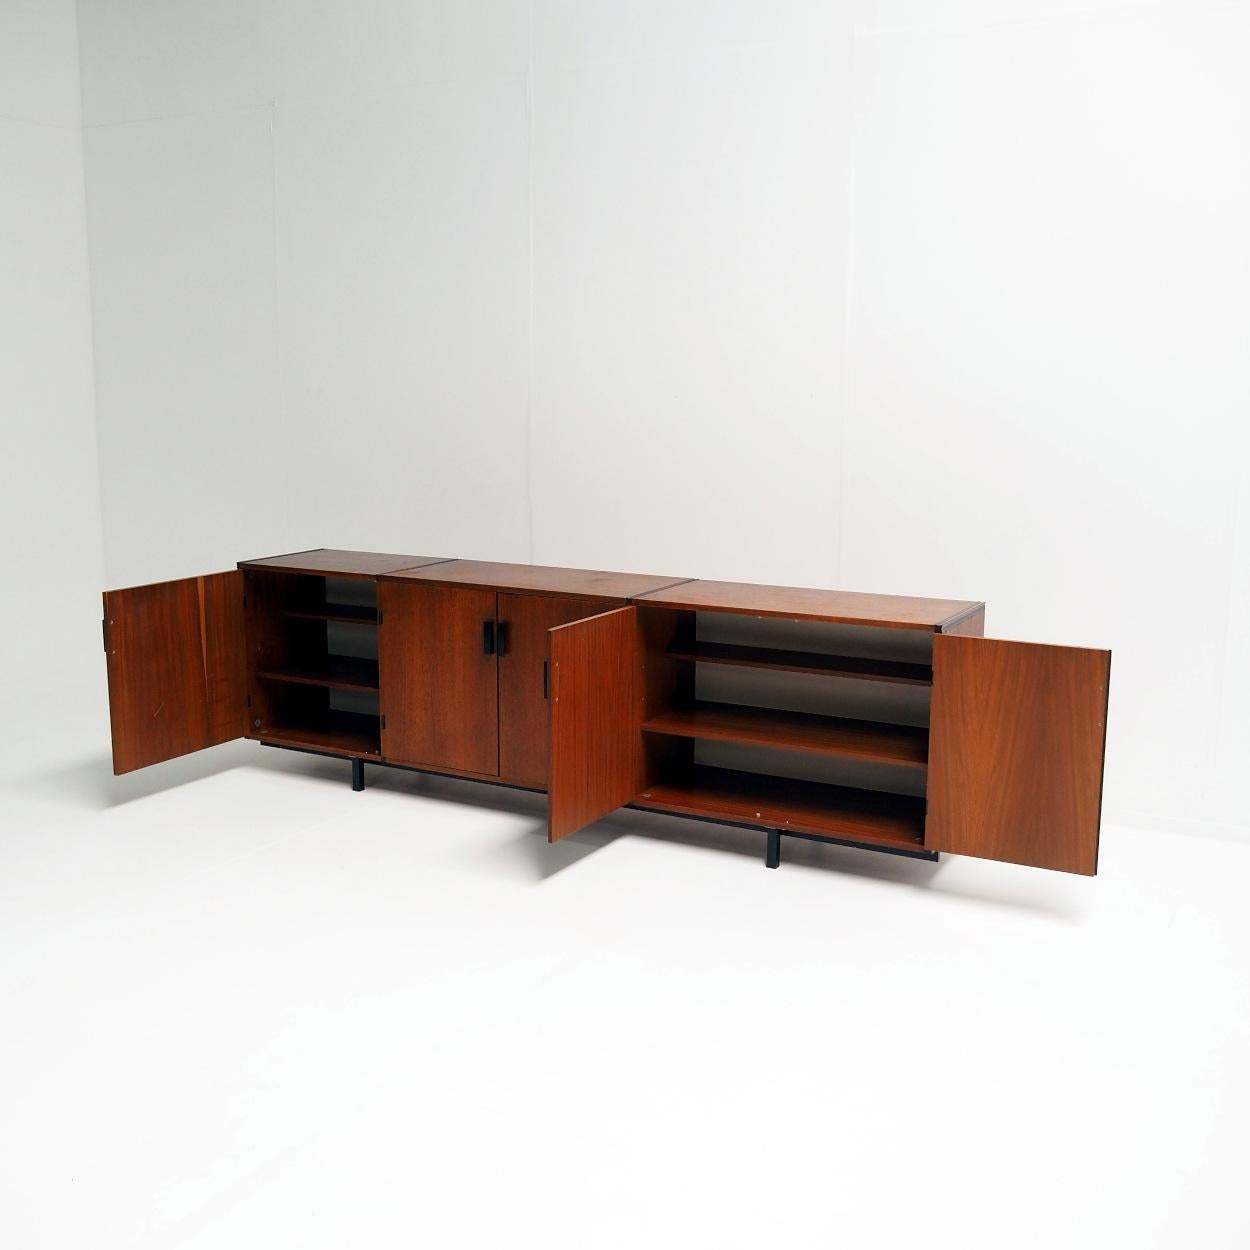 Dutch 1960s ‘Made to Measure’ sideboard by Cees Braakman for Pastoe